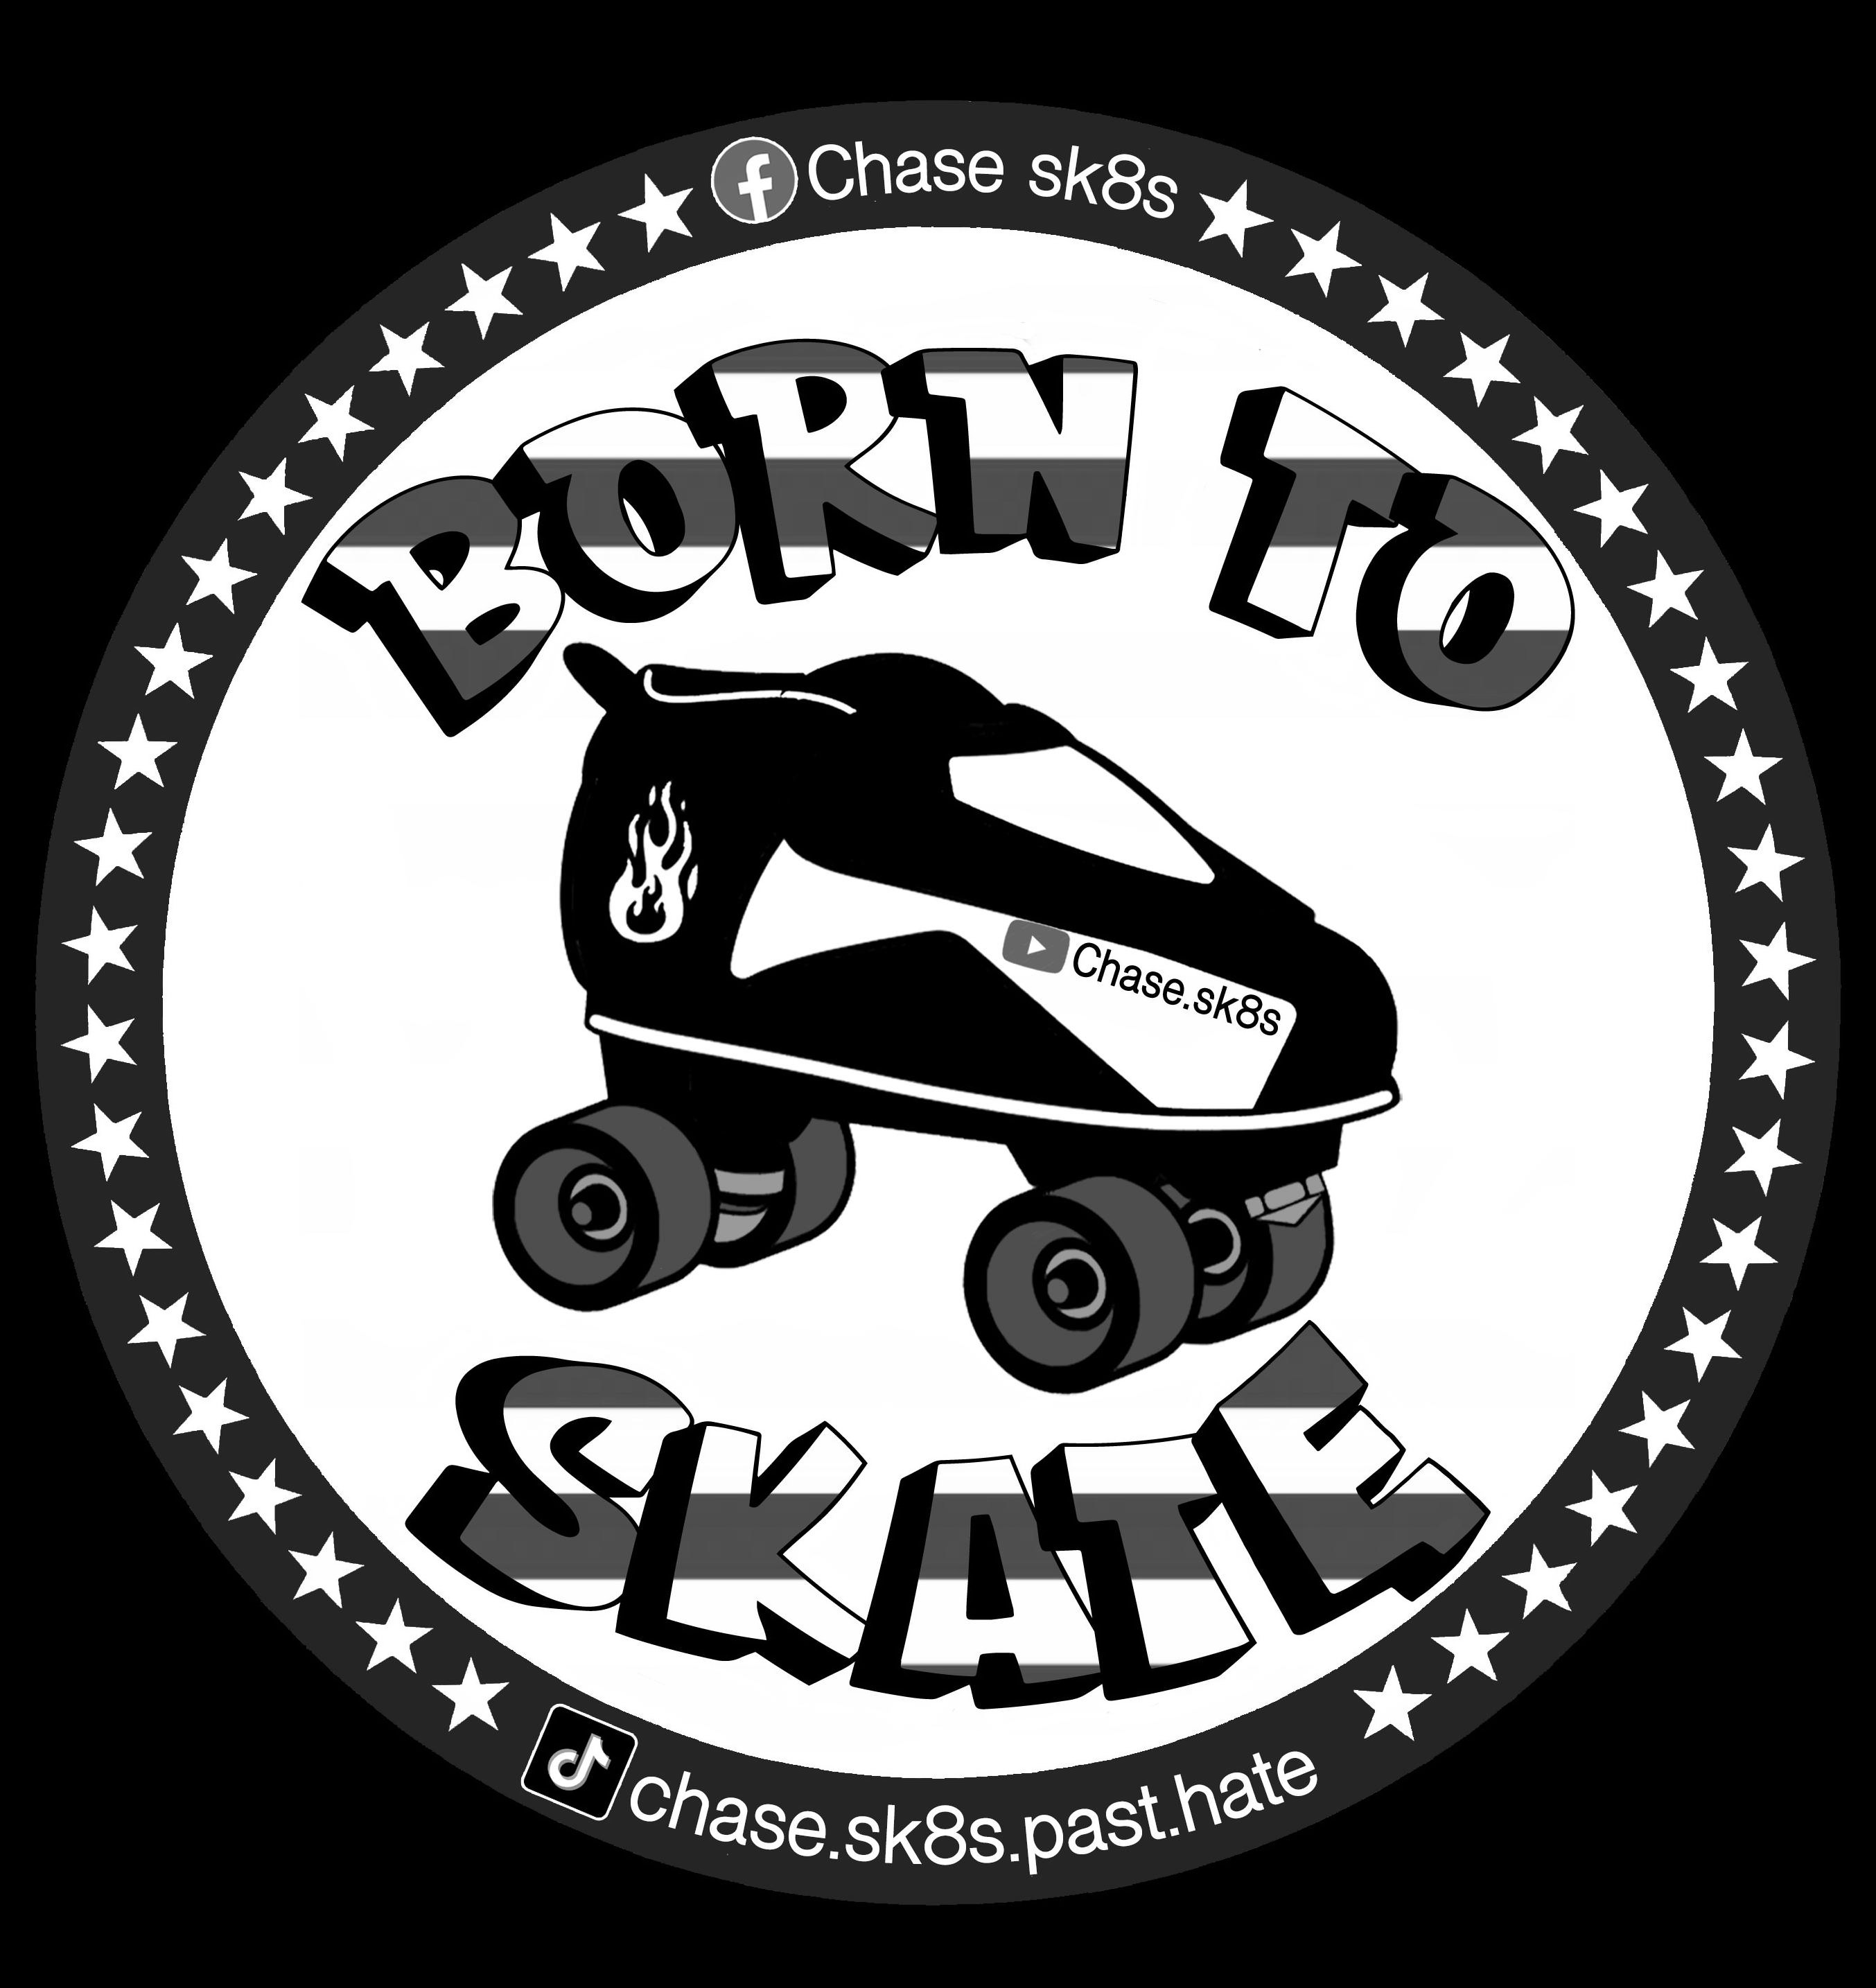 Trademark Logo BORN TO SKATE, CHASE.SKATES.PAST.HATE, CHASE.SK8S AND CHASE SK8S